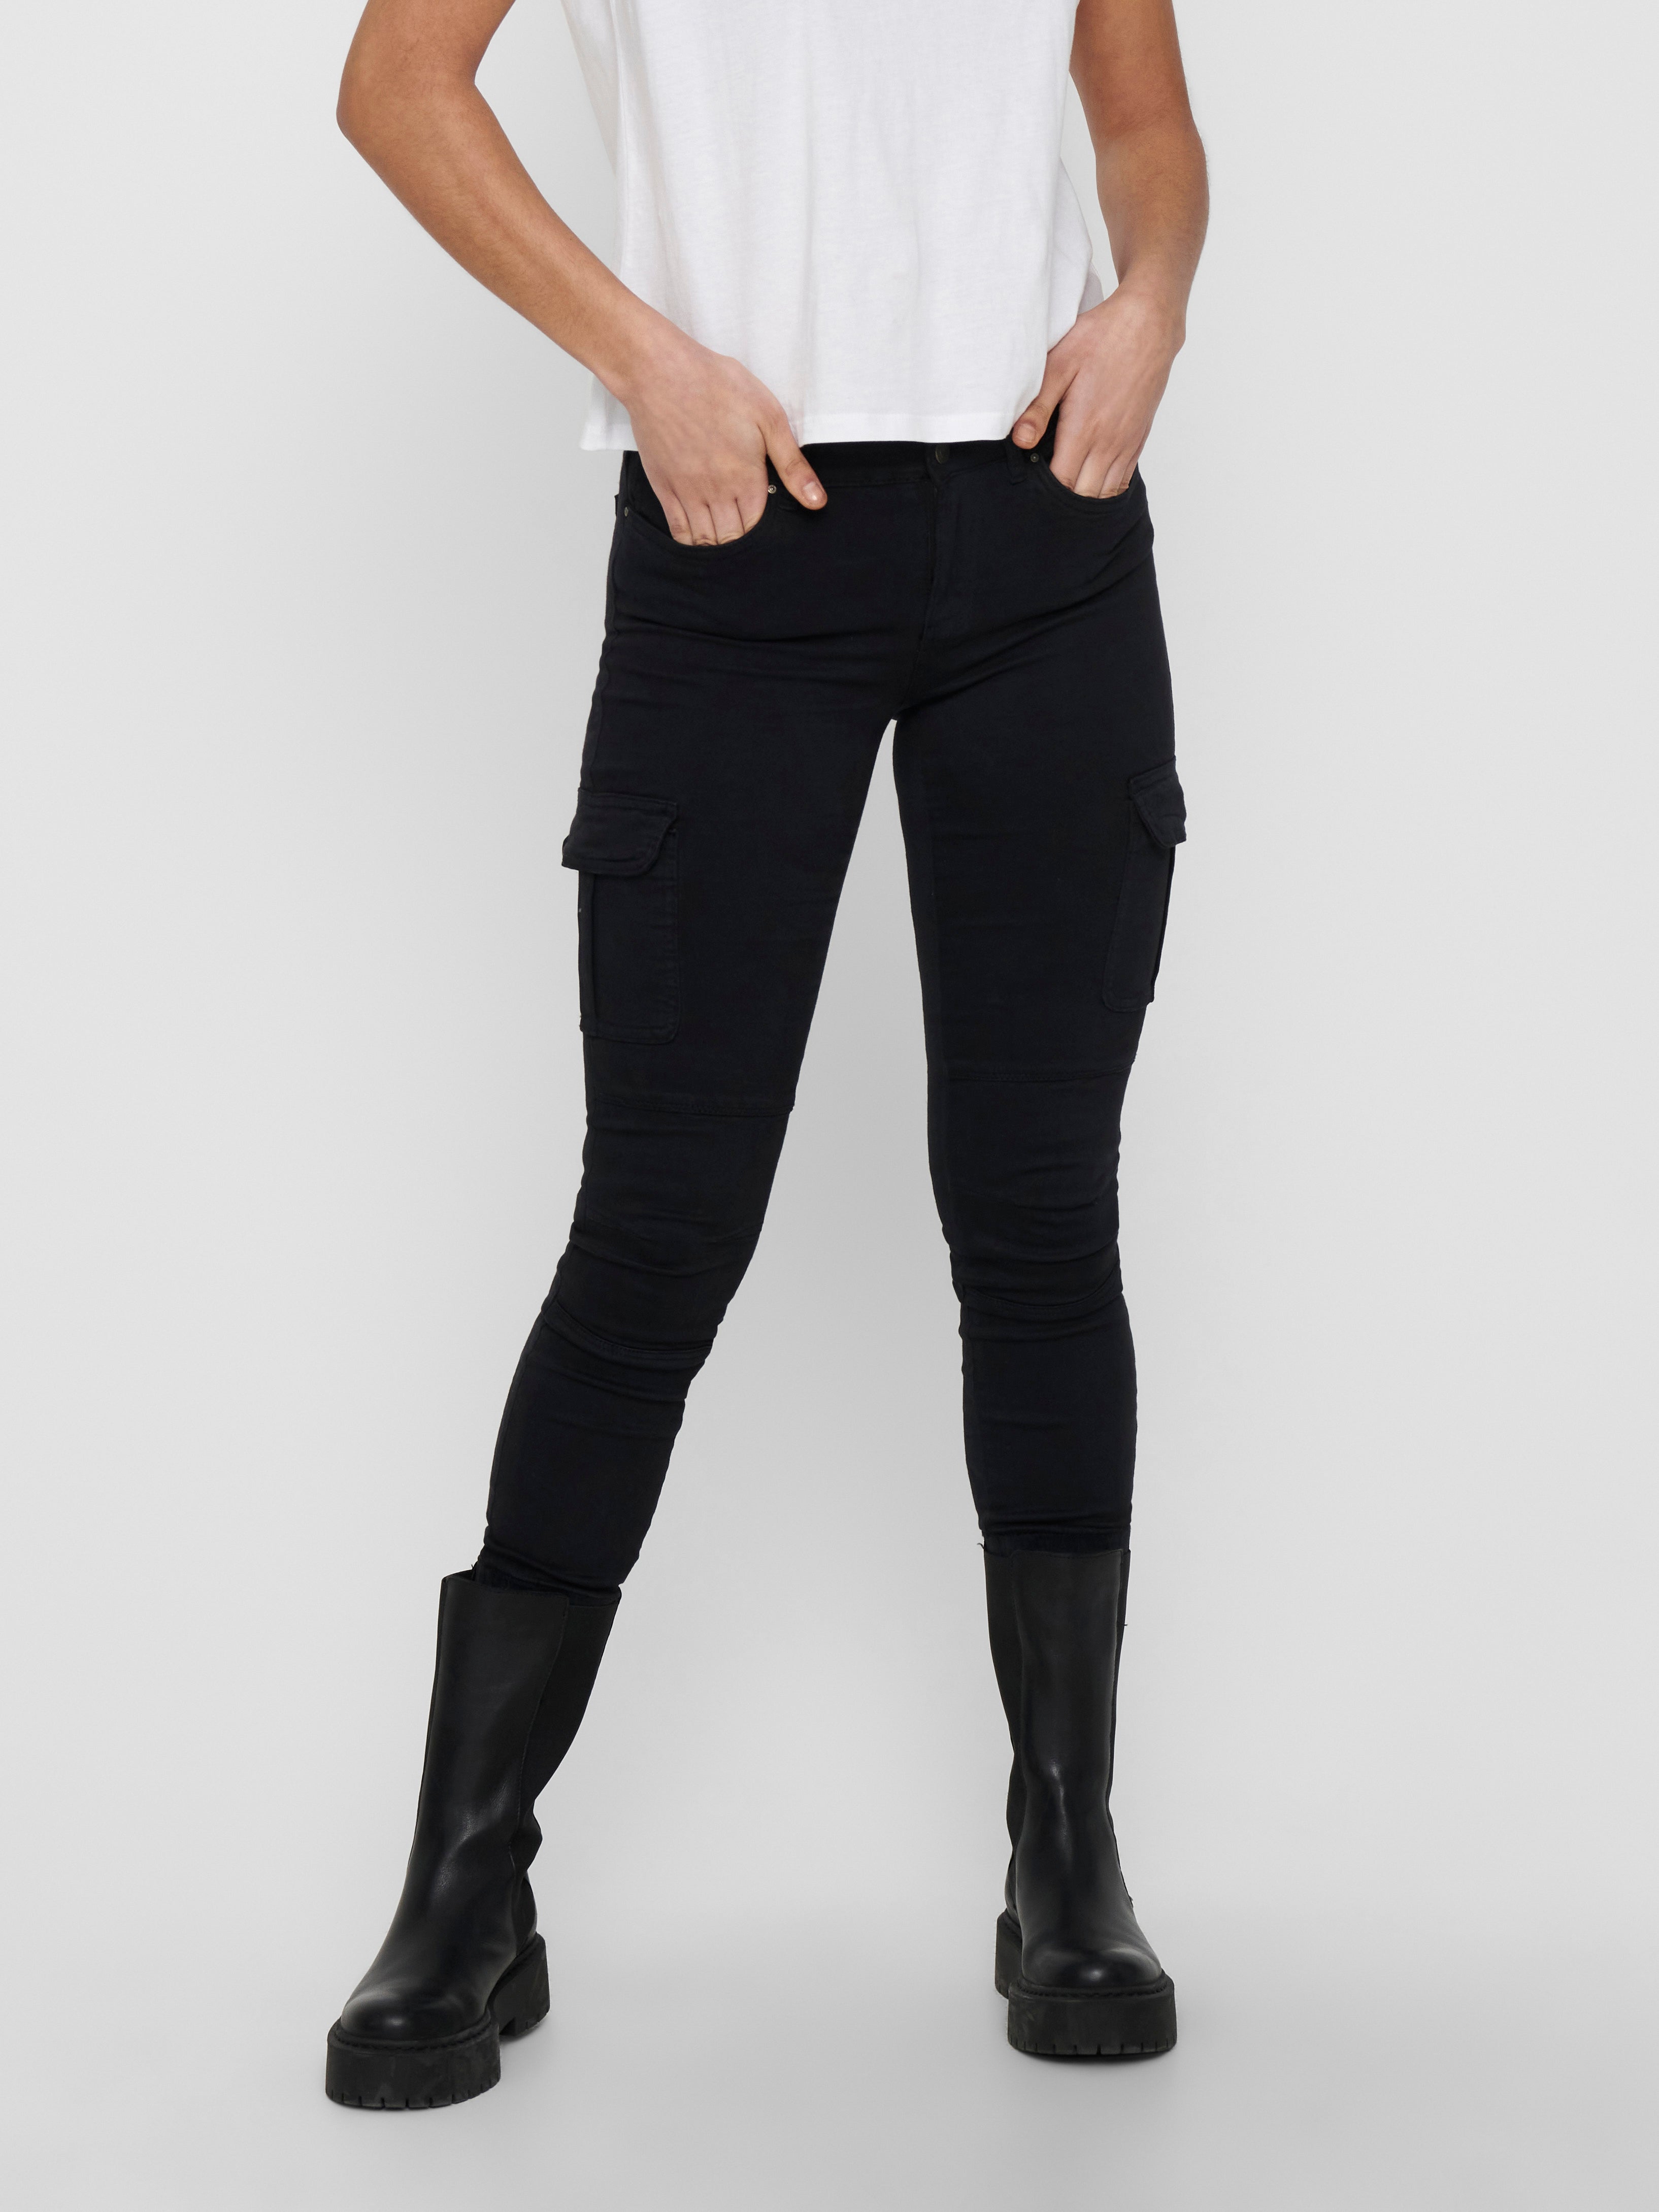 Women's Trousers: Chinos, Culottes & More | ONLY